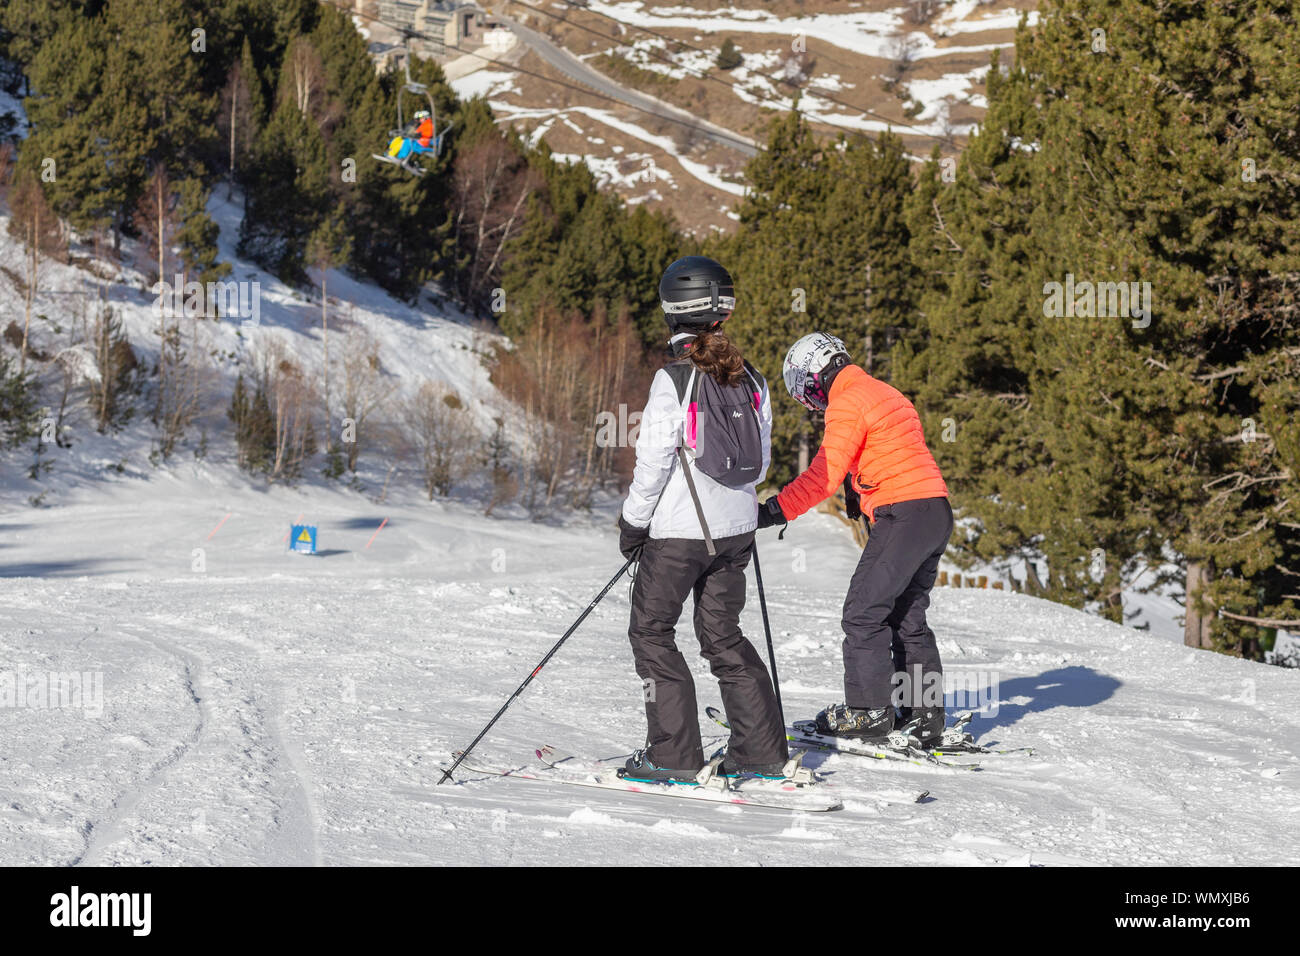 PYRENEES, ANDORRA - FEBRUARY 12, 2019: Two skiers stand at the beginning of the ski slope and look down. Pyrenees, Andorra, winter sunny day Stock Photo